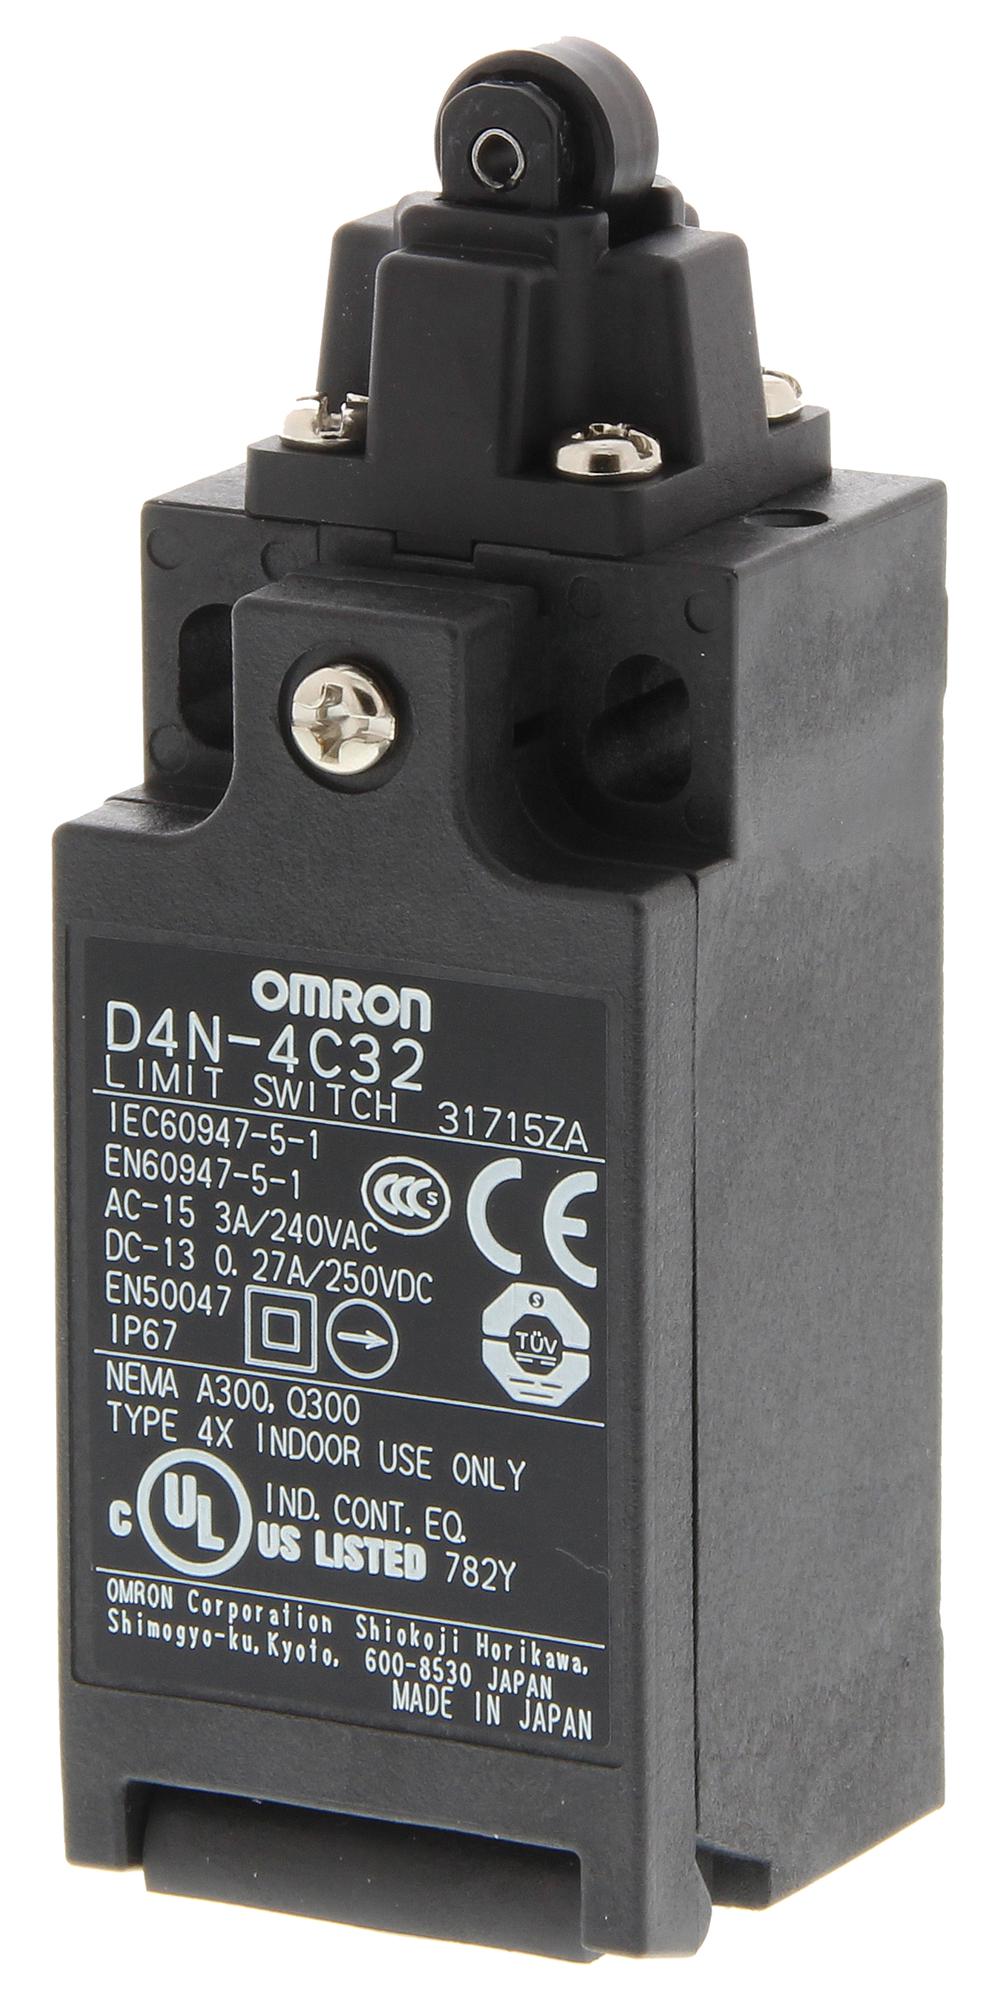 D4N-4C32 LIMIT SWITCH SWITCHES OMRON